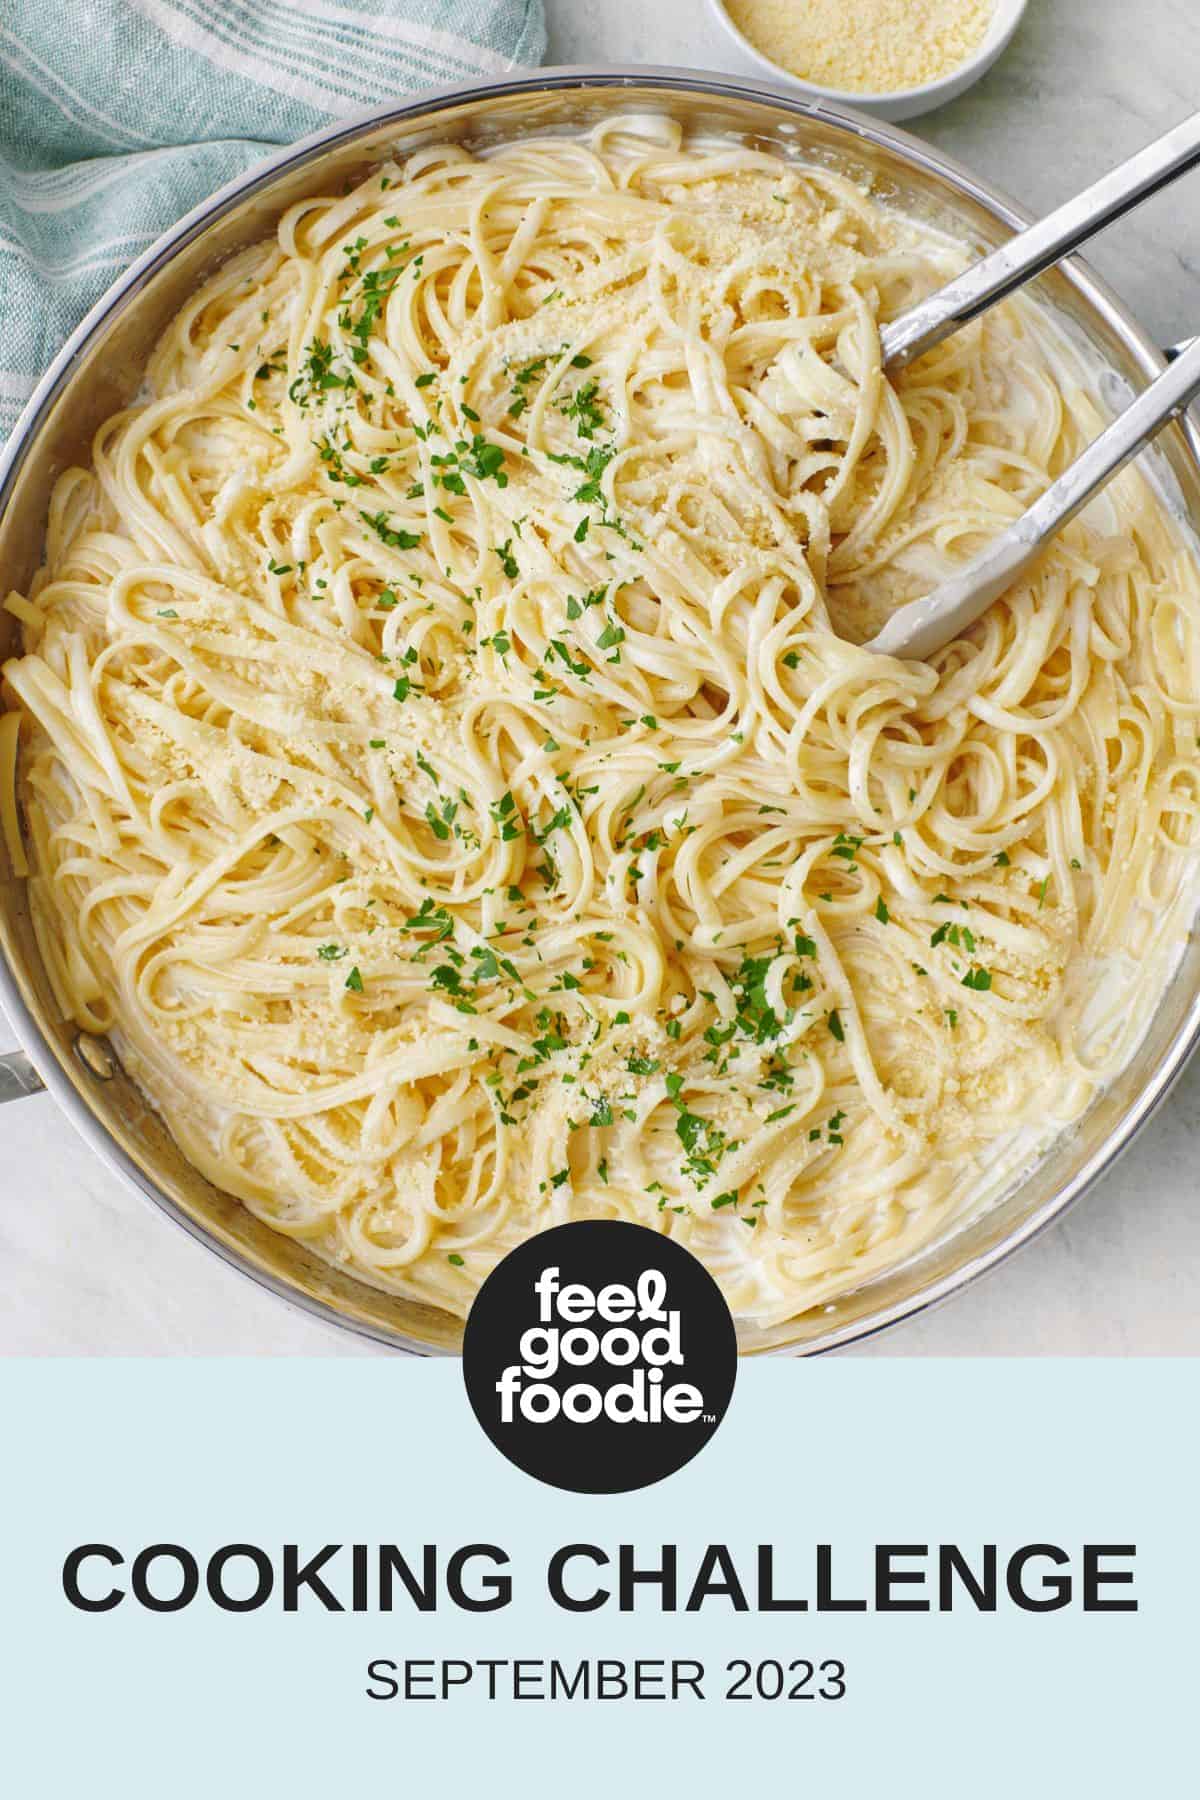 September cooking challenge 2023 for cottage cheese alfredo pasta.